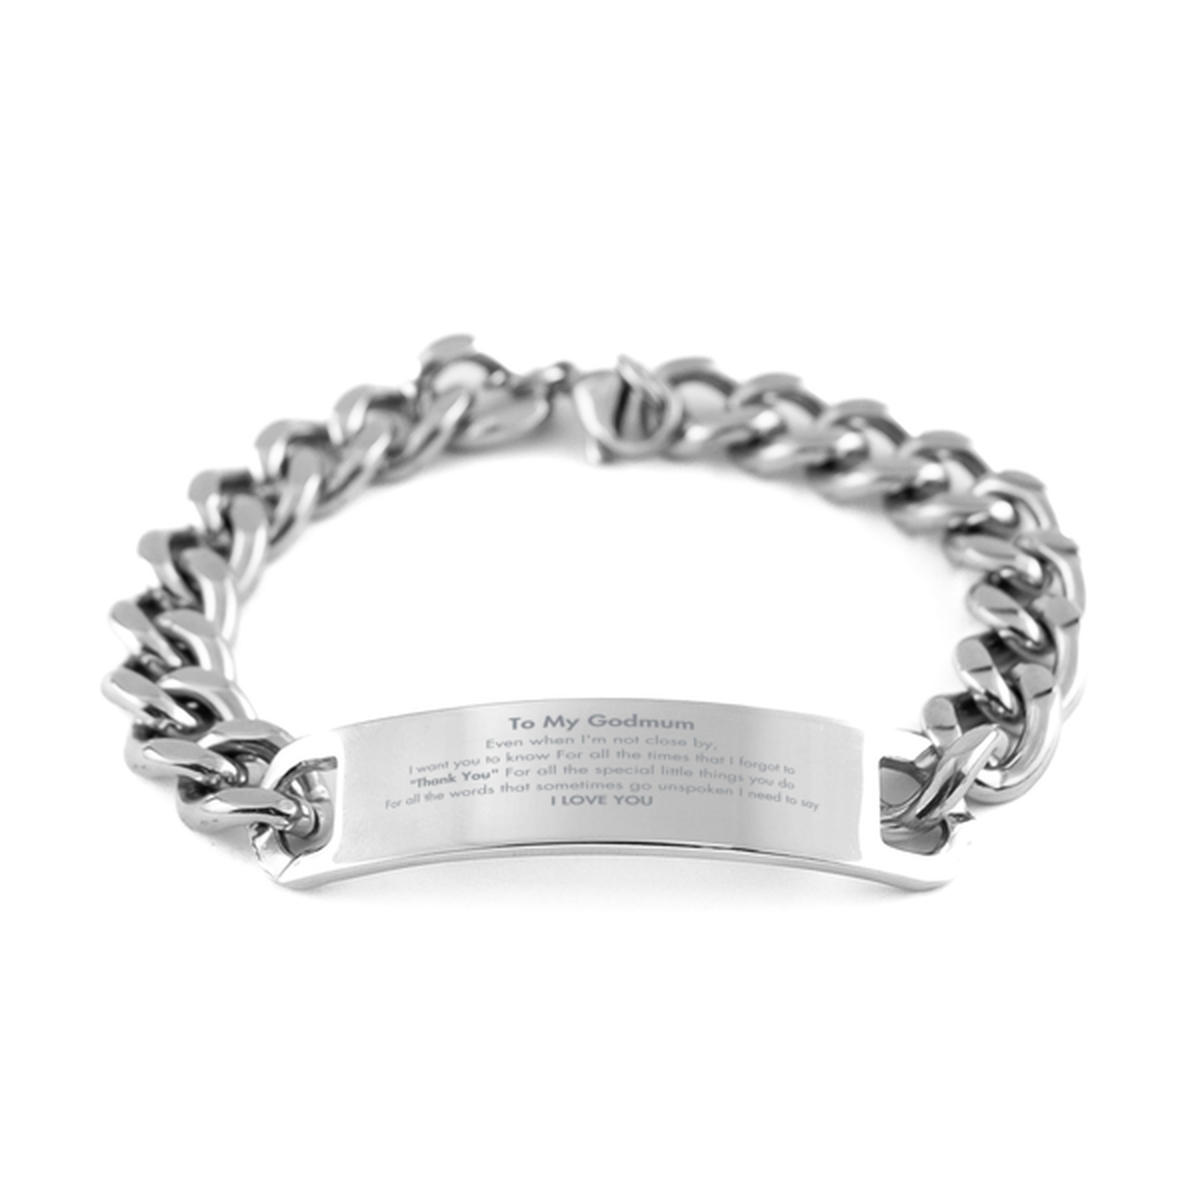 Thank You Gifts for Godmum, Keepsake Cuban Chain Stainless Steel Bracelet Gifts for Godmum Birthday Mother's day Father's Day Godmum For all the words That sometimes go unspoken I need to say I LOVE YOU